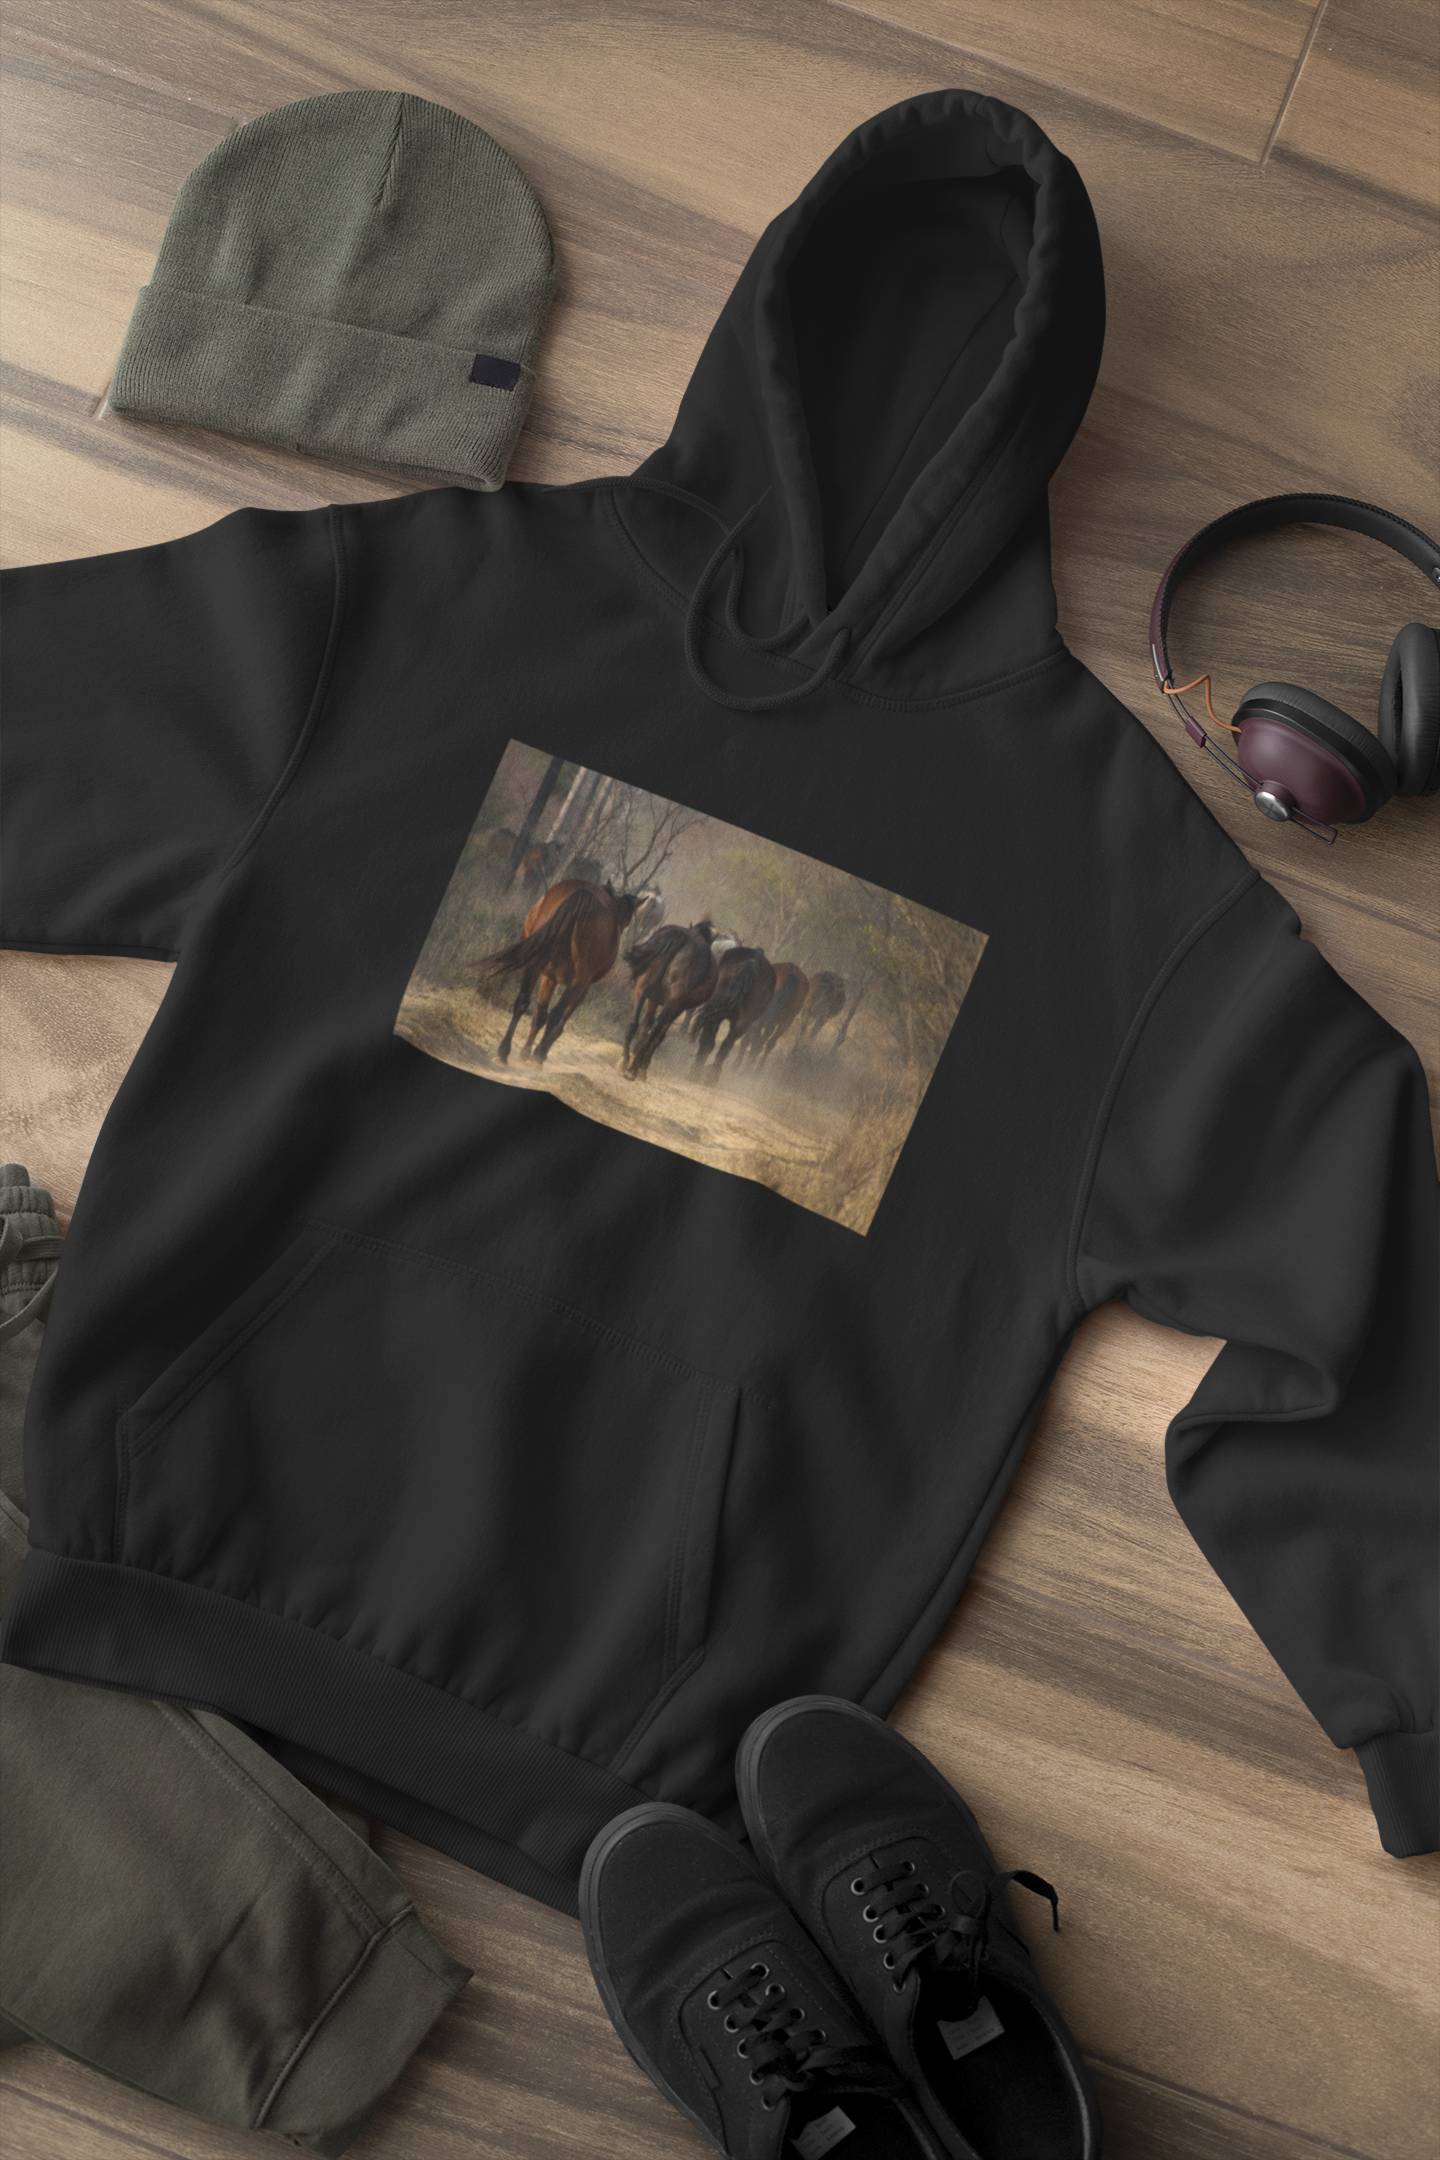 Back to the Plains - Hoodie